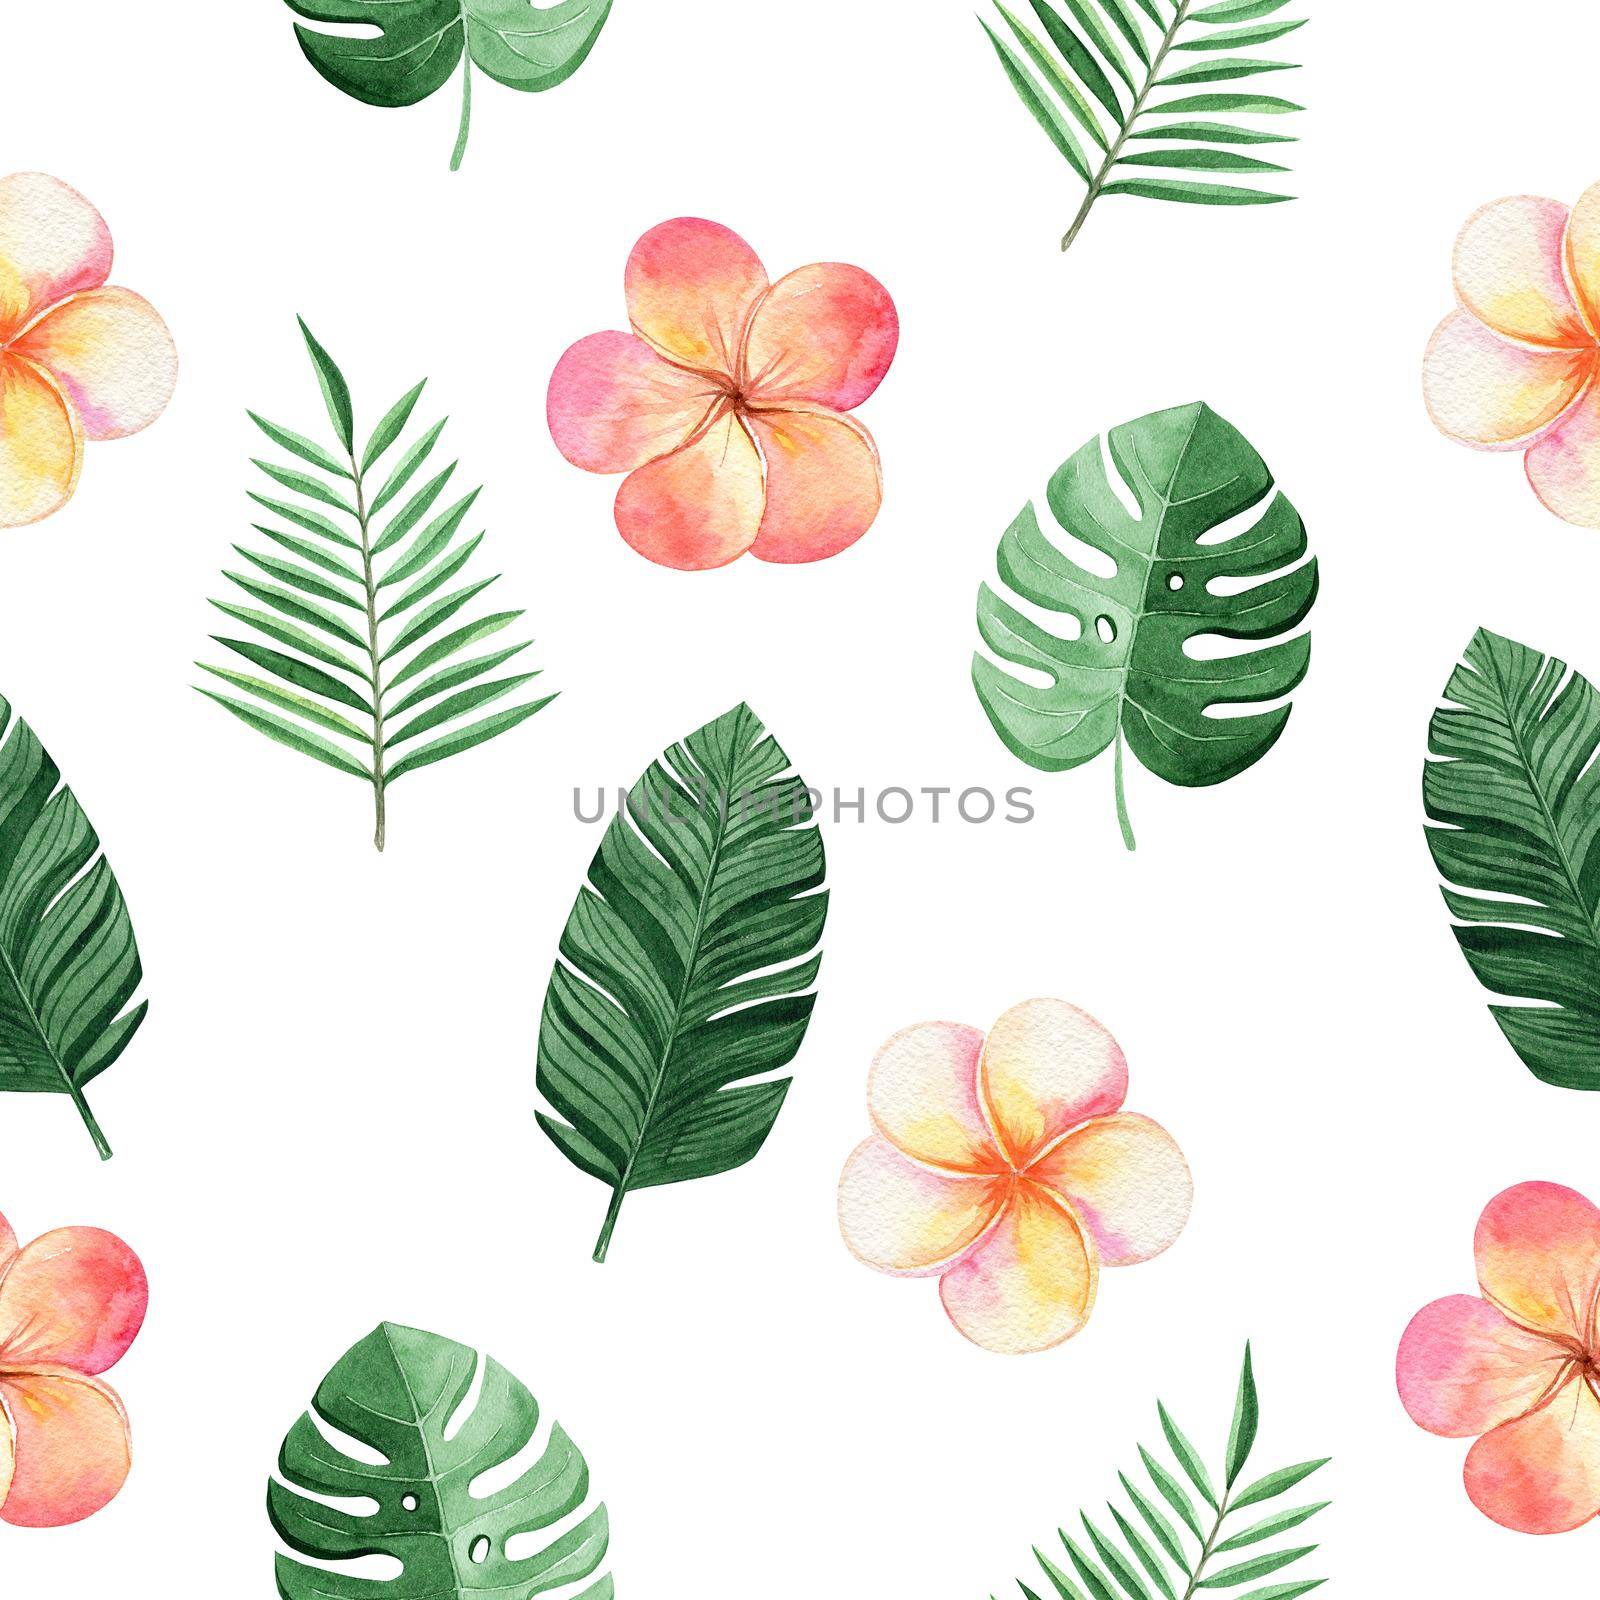 watercolor tropical flower and palm leaves seamless pattern with plumeria and monstera plants on white background for fabric, textile, branding, invitations, scrapbooking, wrapping by dreamloud